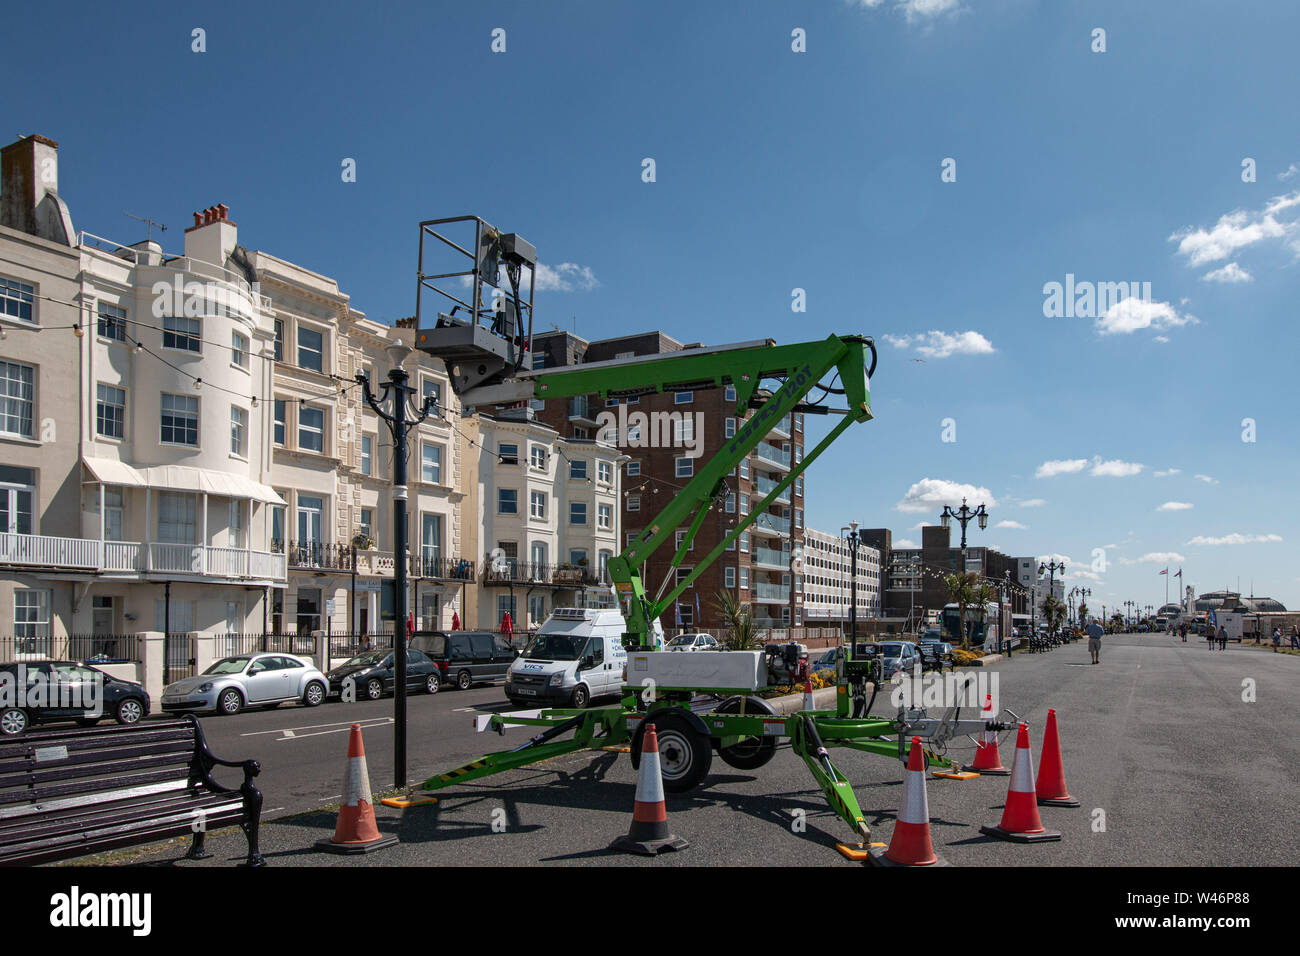 Cherry picker replacing light bulbs in the seafront lights in Worthing, West Sussex,UK Stock Photo